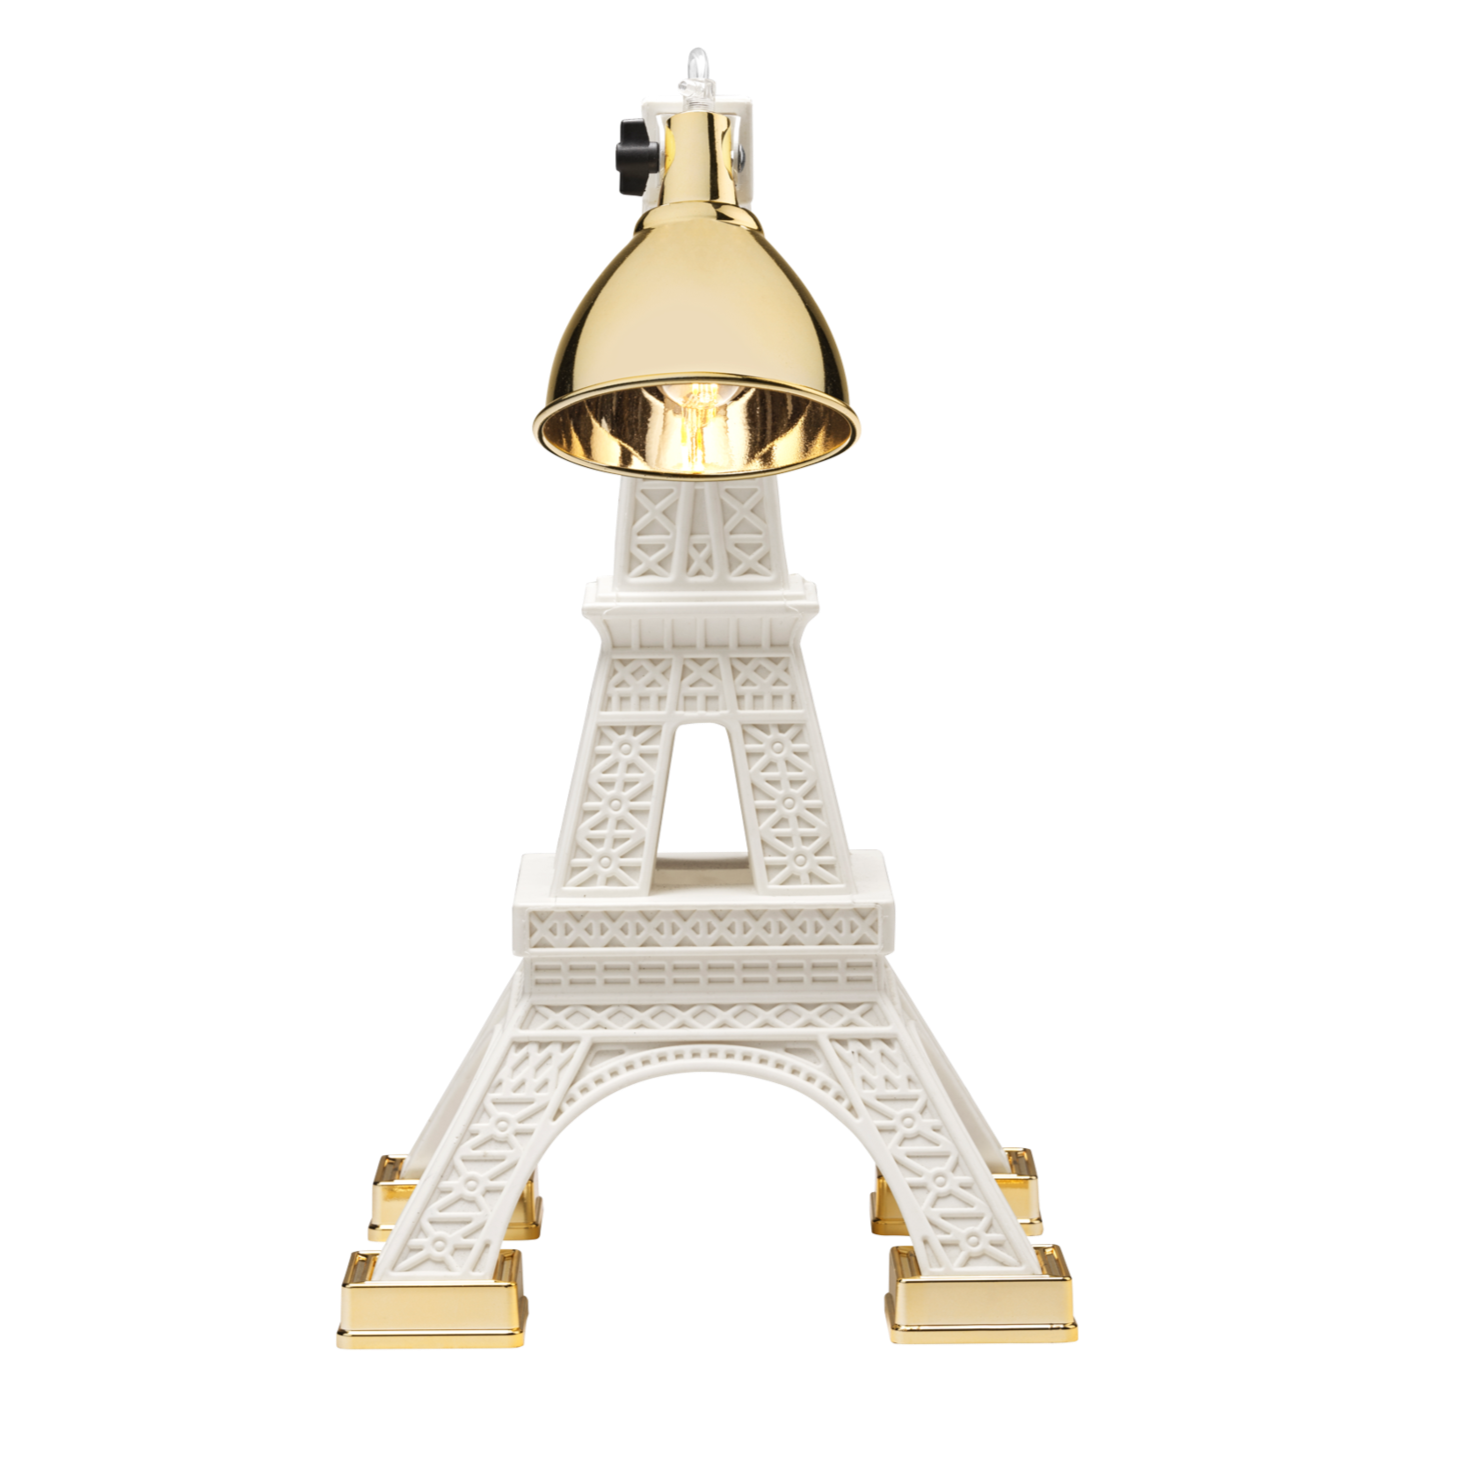 The Paris lamp from Qeebooo, designed by the Job studio, presents the miniature Eiffel Tower. The concept of Job Smeets was inspired by the years when he lived in Paris as a young "artist", and the Eiffel Tower was his neighbor who gave him comfort.